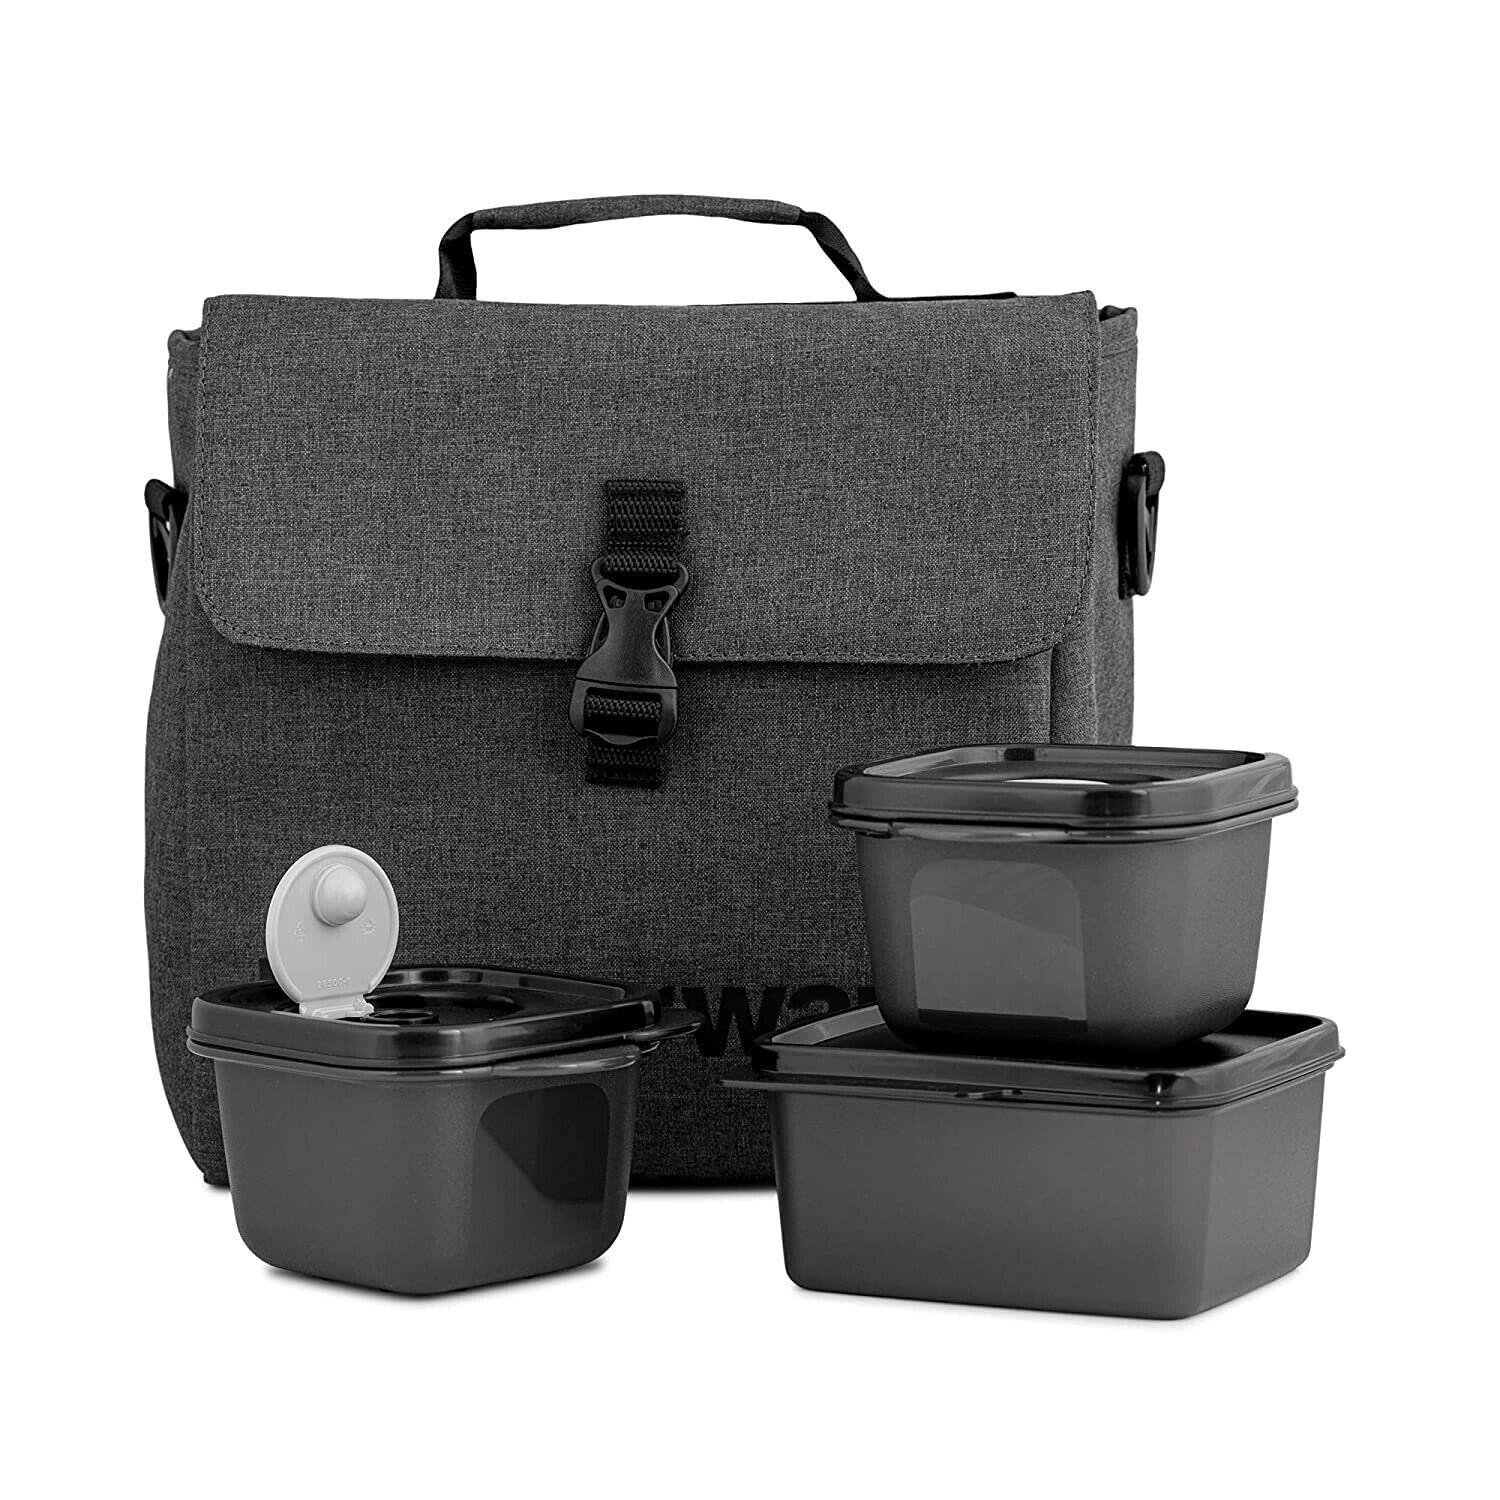 Tupperware Urban Best Lunch Set with Bag, 3-Pieces, Black (Plastic)